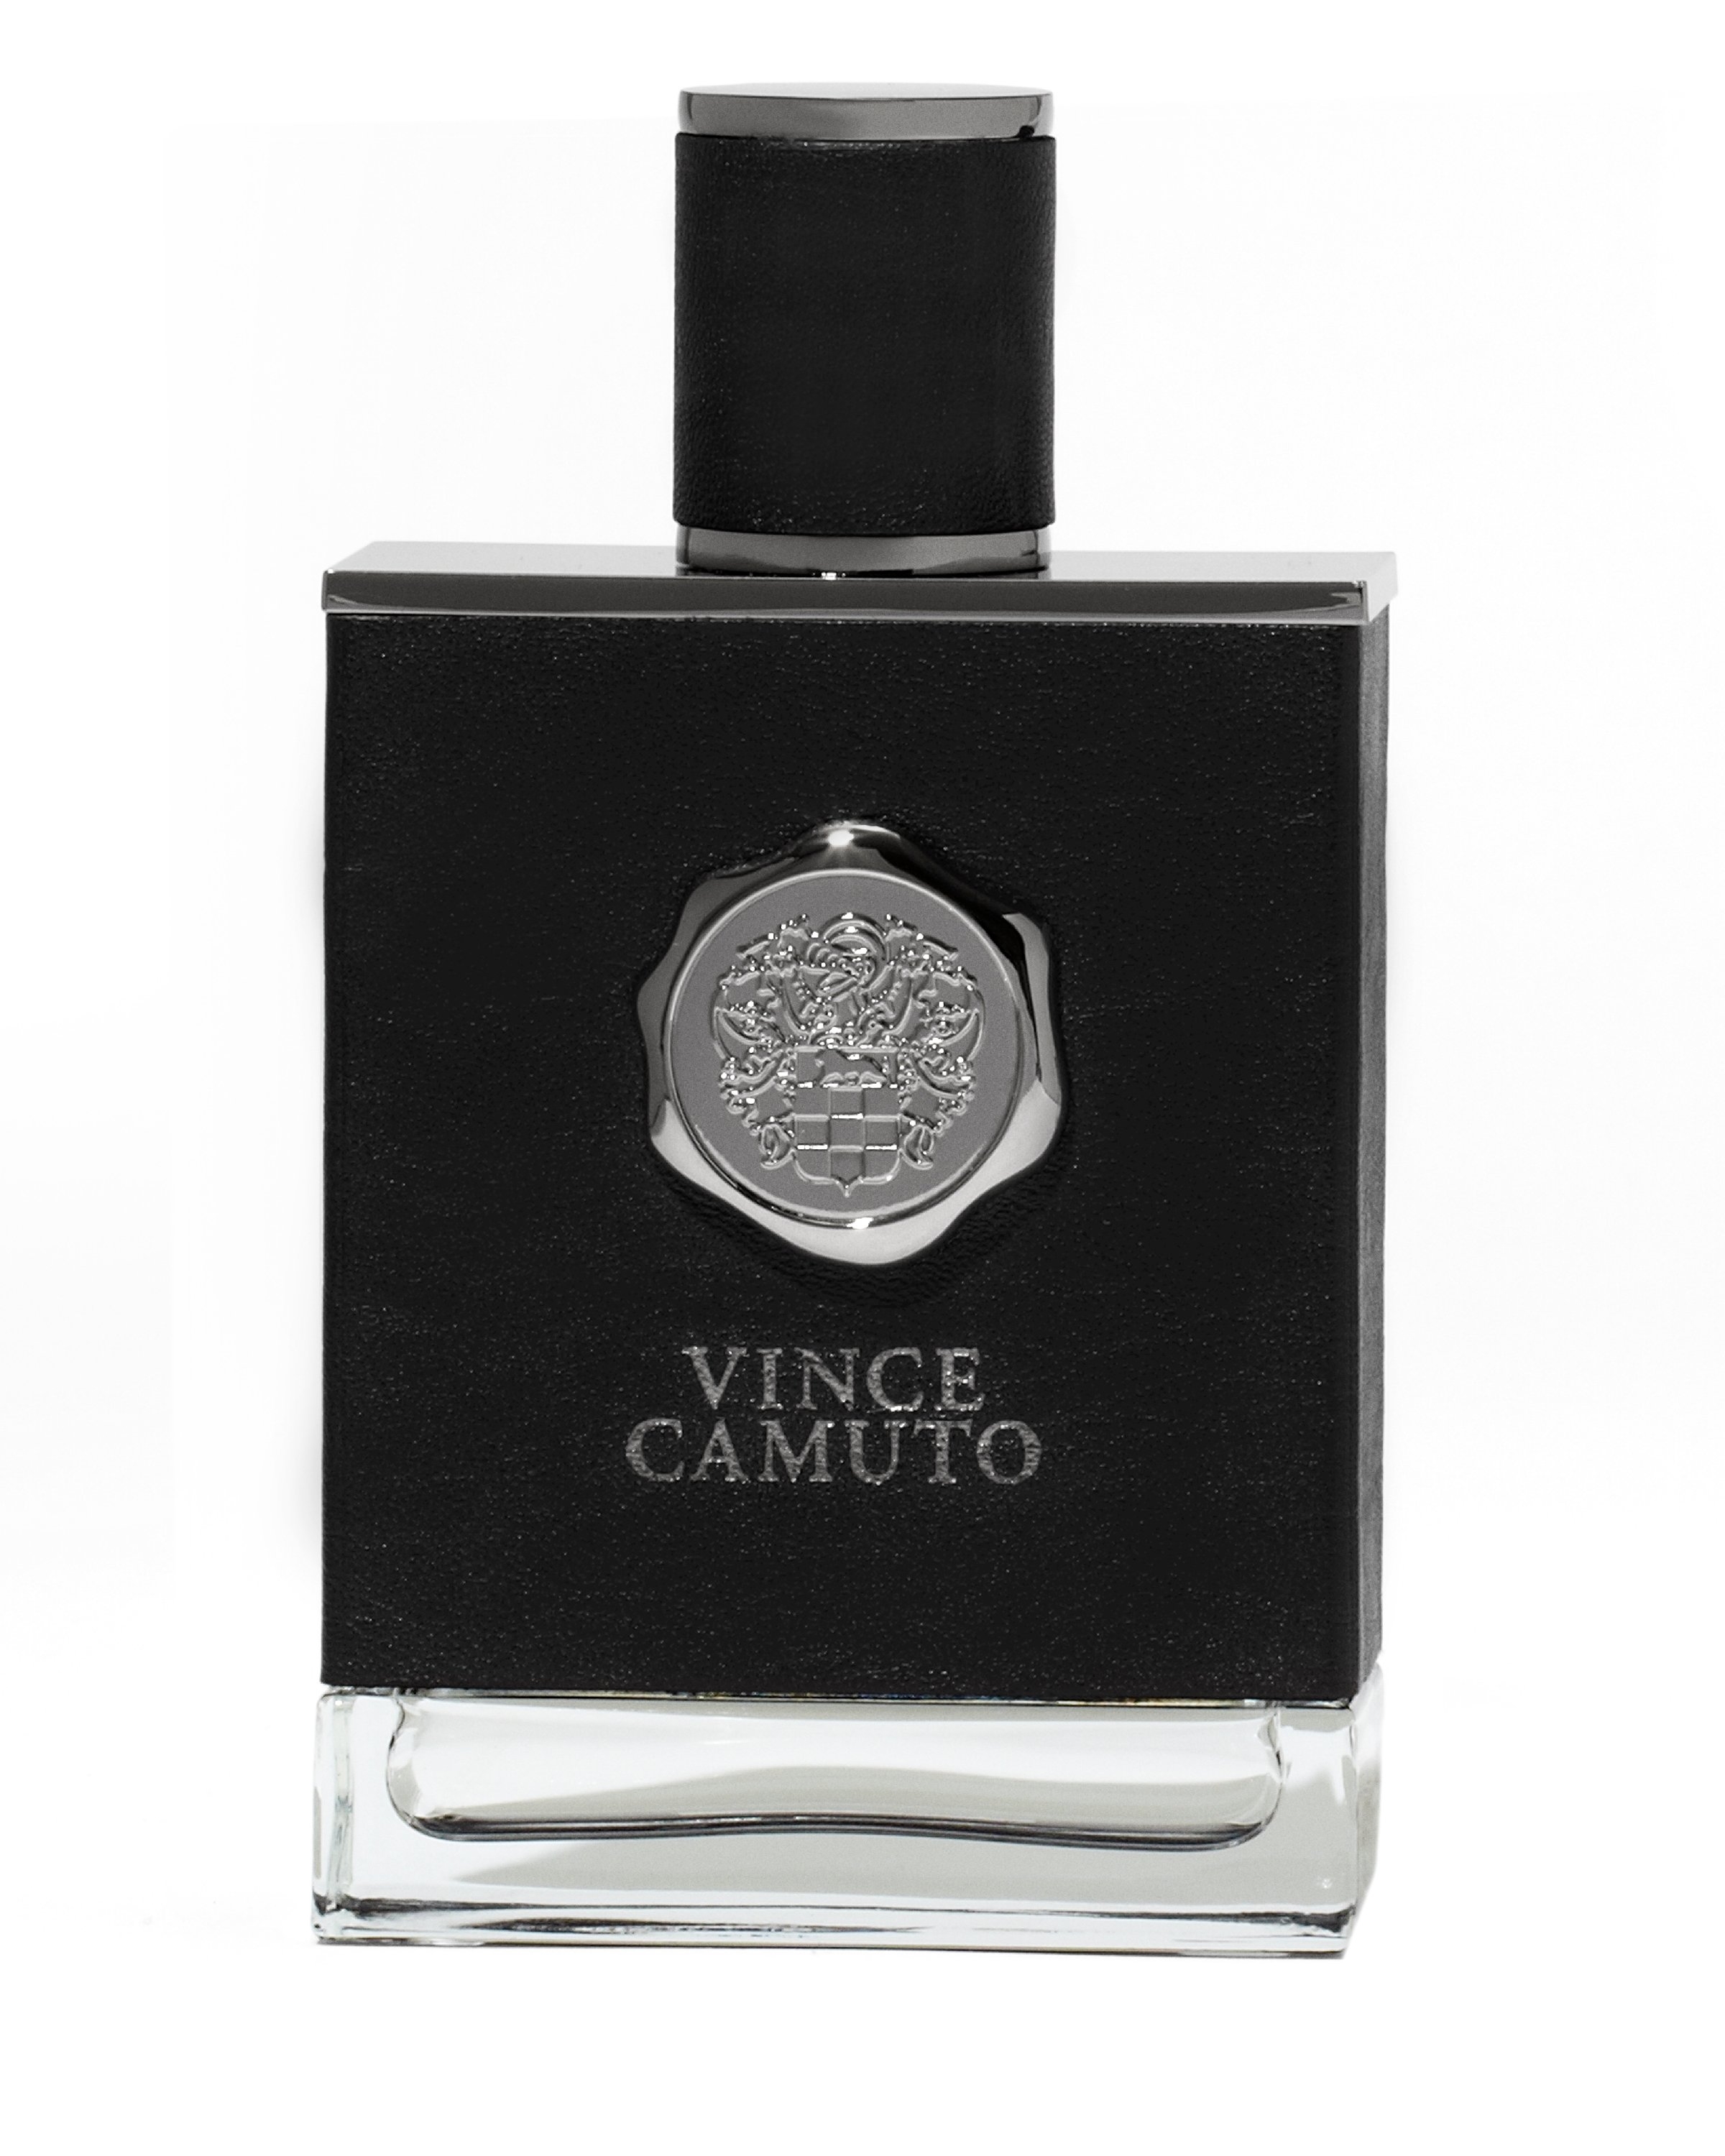 VINCE CAMUTO FOR MEN